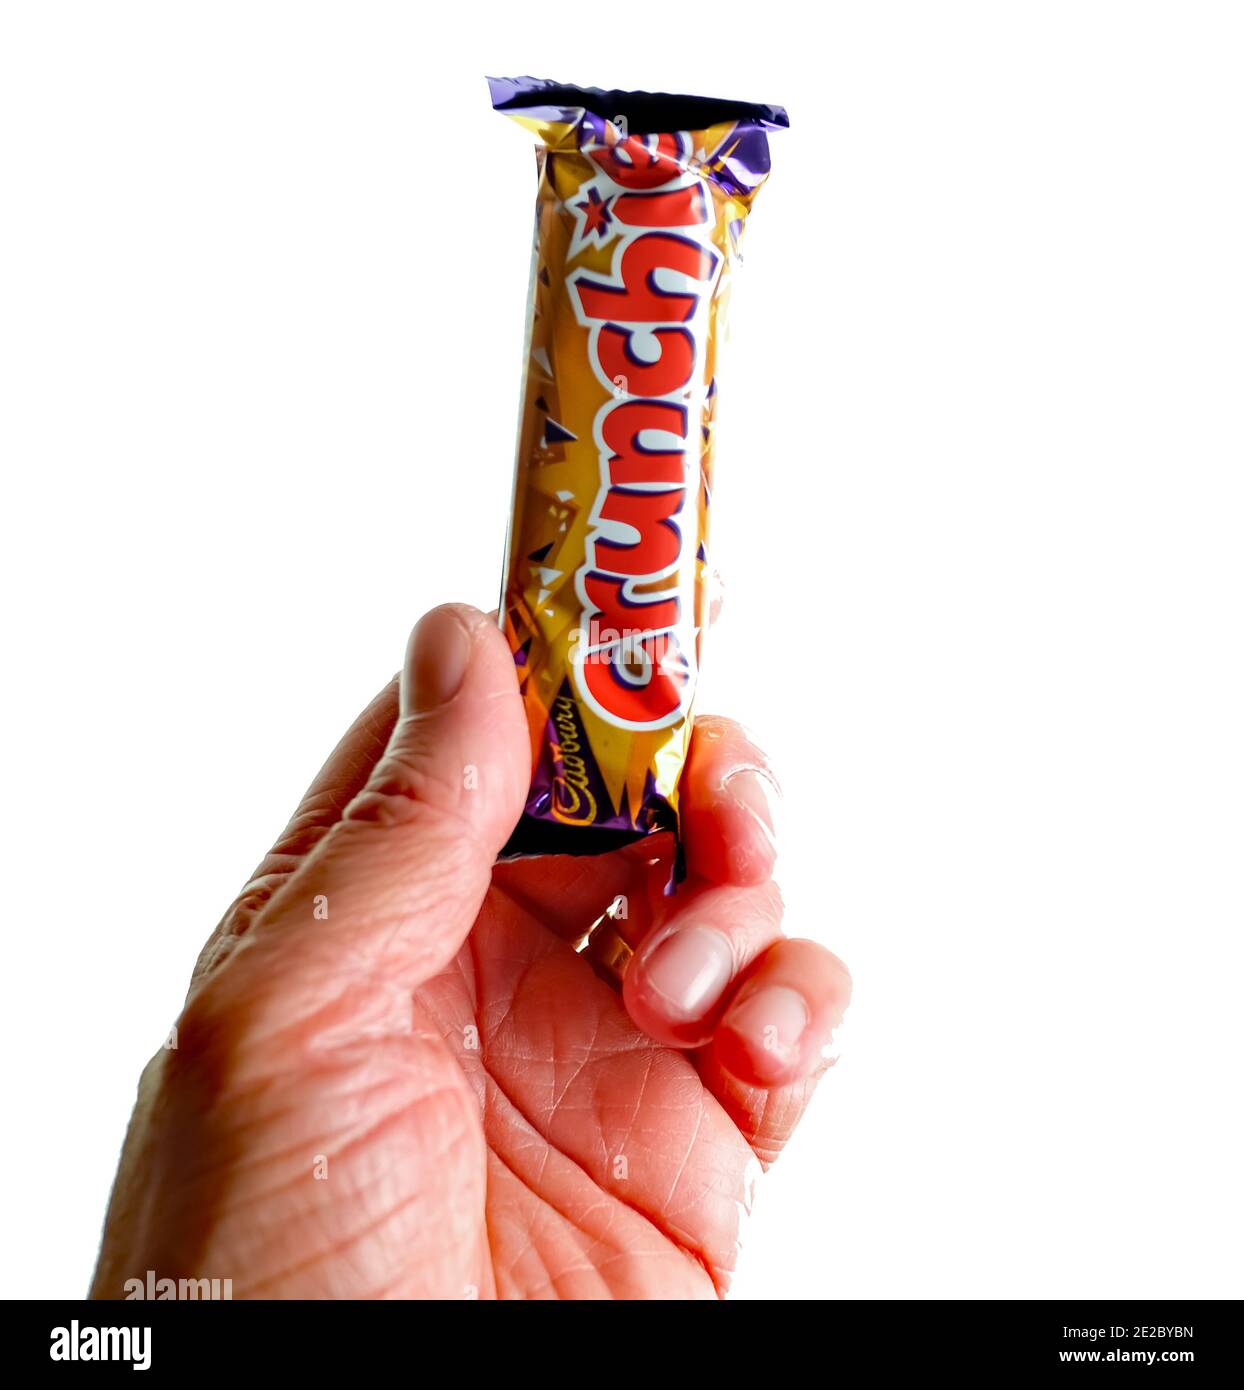 Norwich, Norfolk, UK – December 24 2020. An illustrative editorial photo of an unidentifiable human holding a Cadbury Crunchie chocolate bar Stock Photo